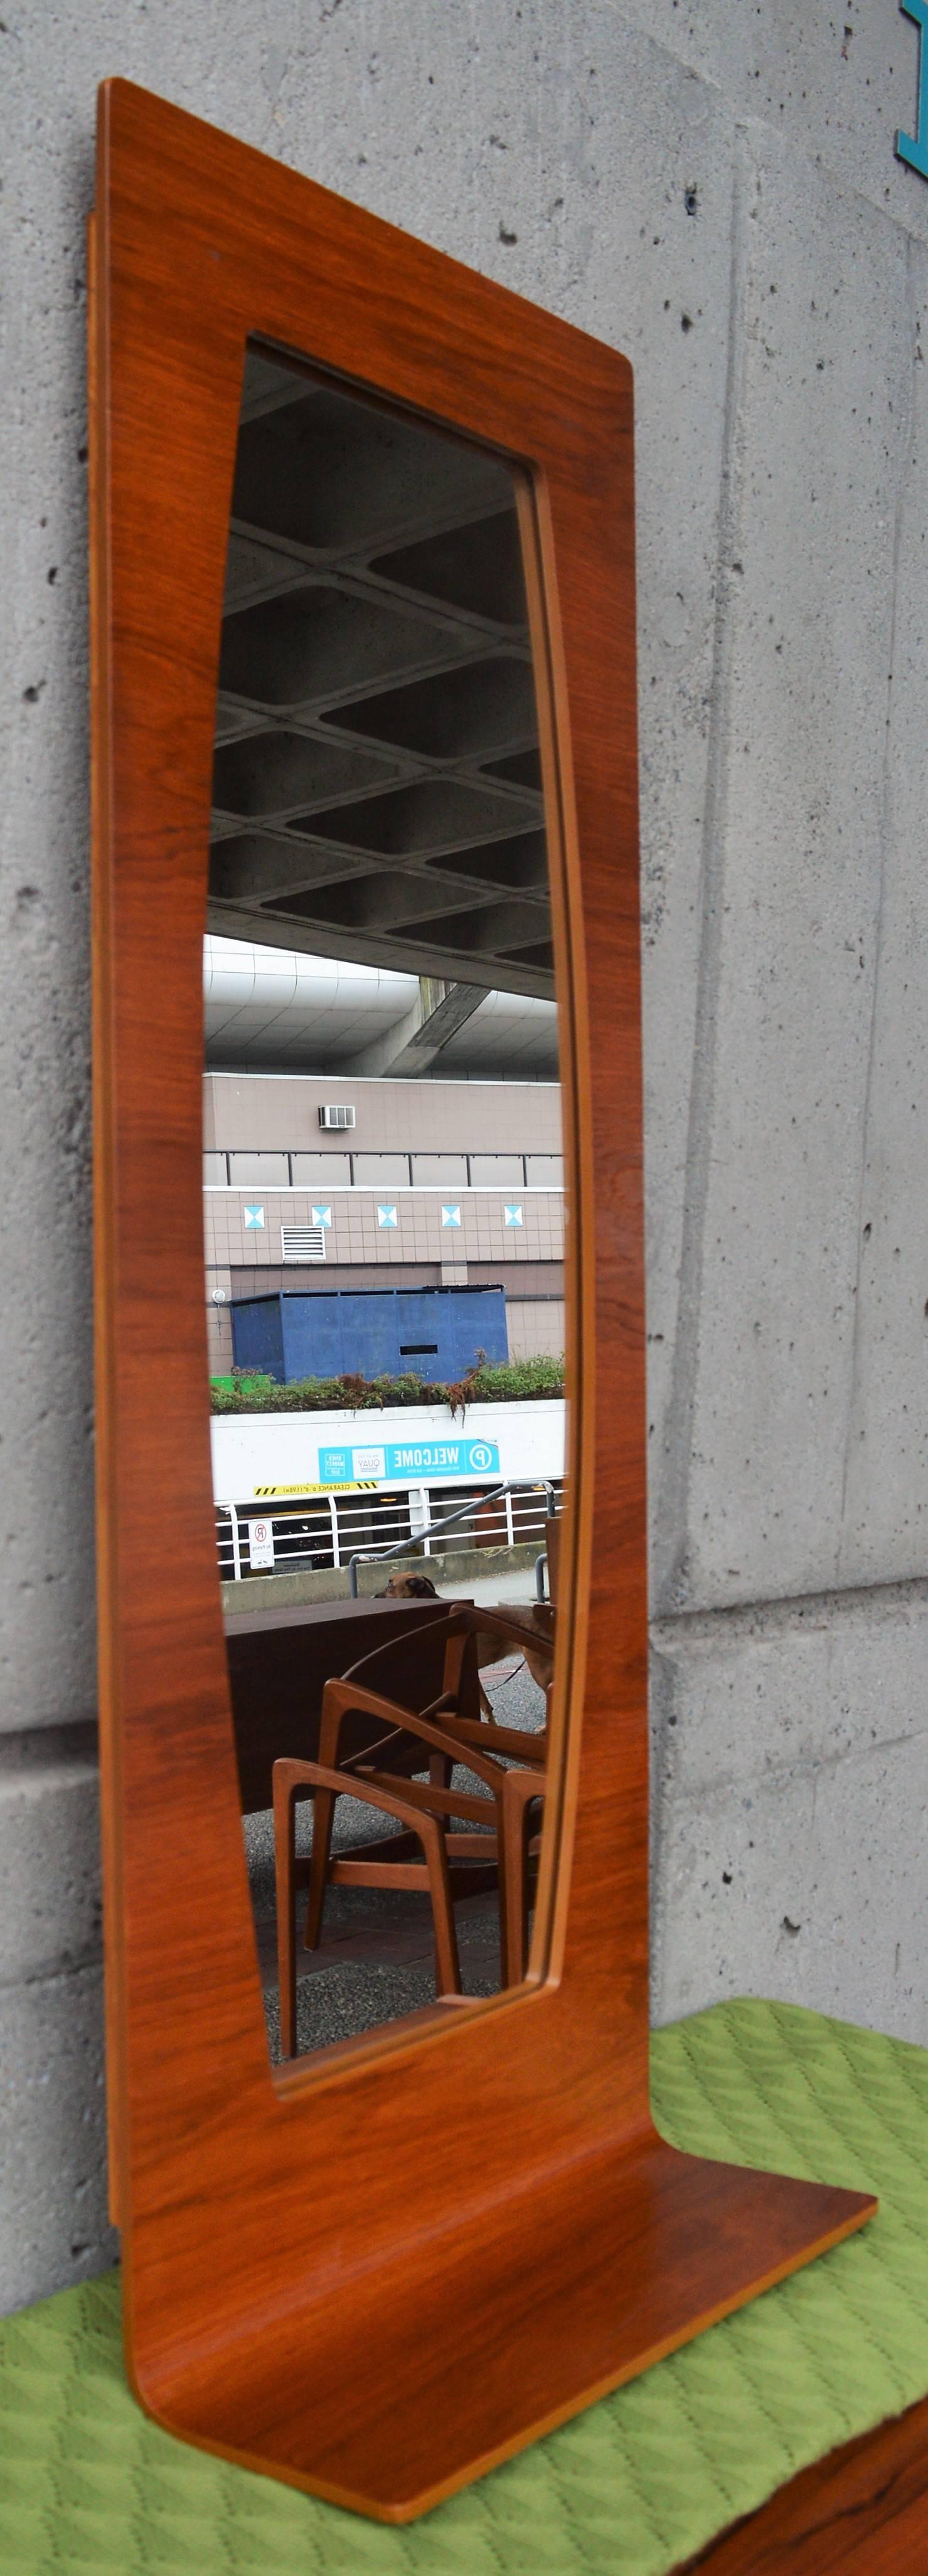 This gorgeous Danish Modern teak large entry mirror with shelf is dramatic with it's curved framing of the mirror, and the continuous single bentply form that curves forward to make the shelf. Nice slim profile so as not to take up too much room,